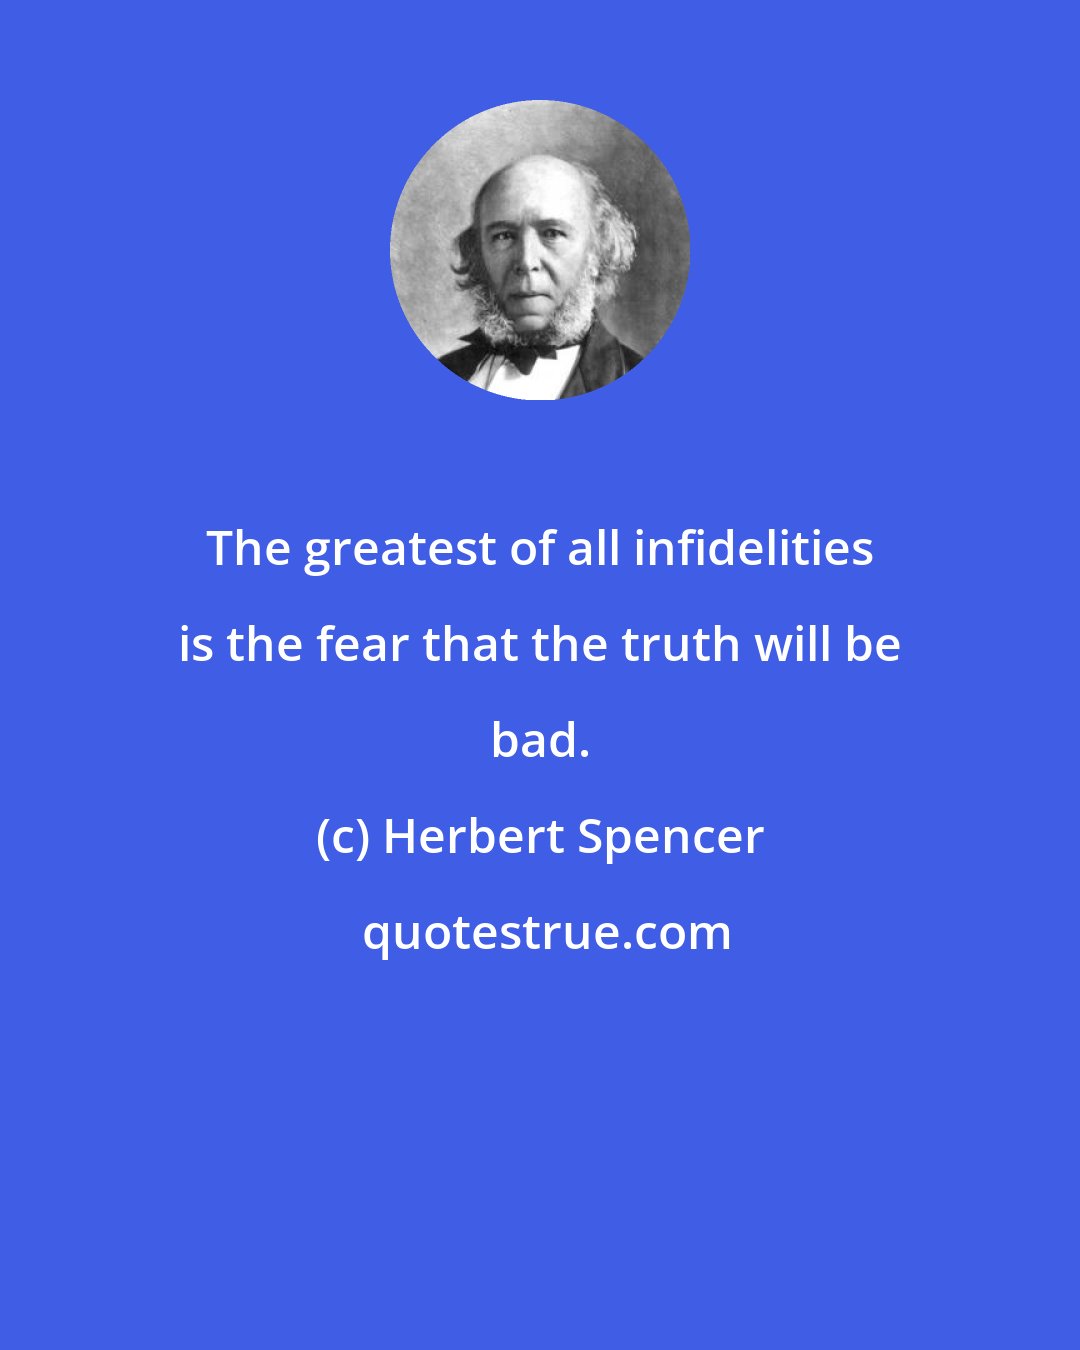 Herbert Spencer: The greatest of all infidelities is the fear that the truth will be bad.